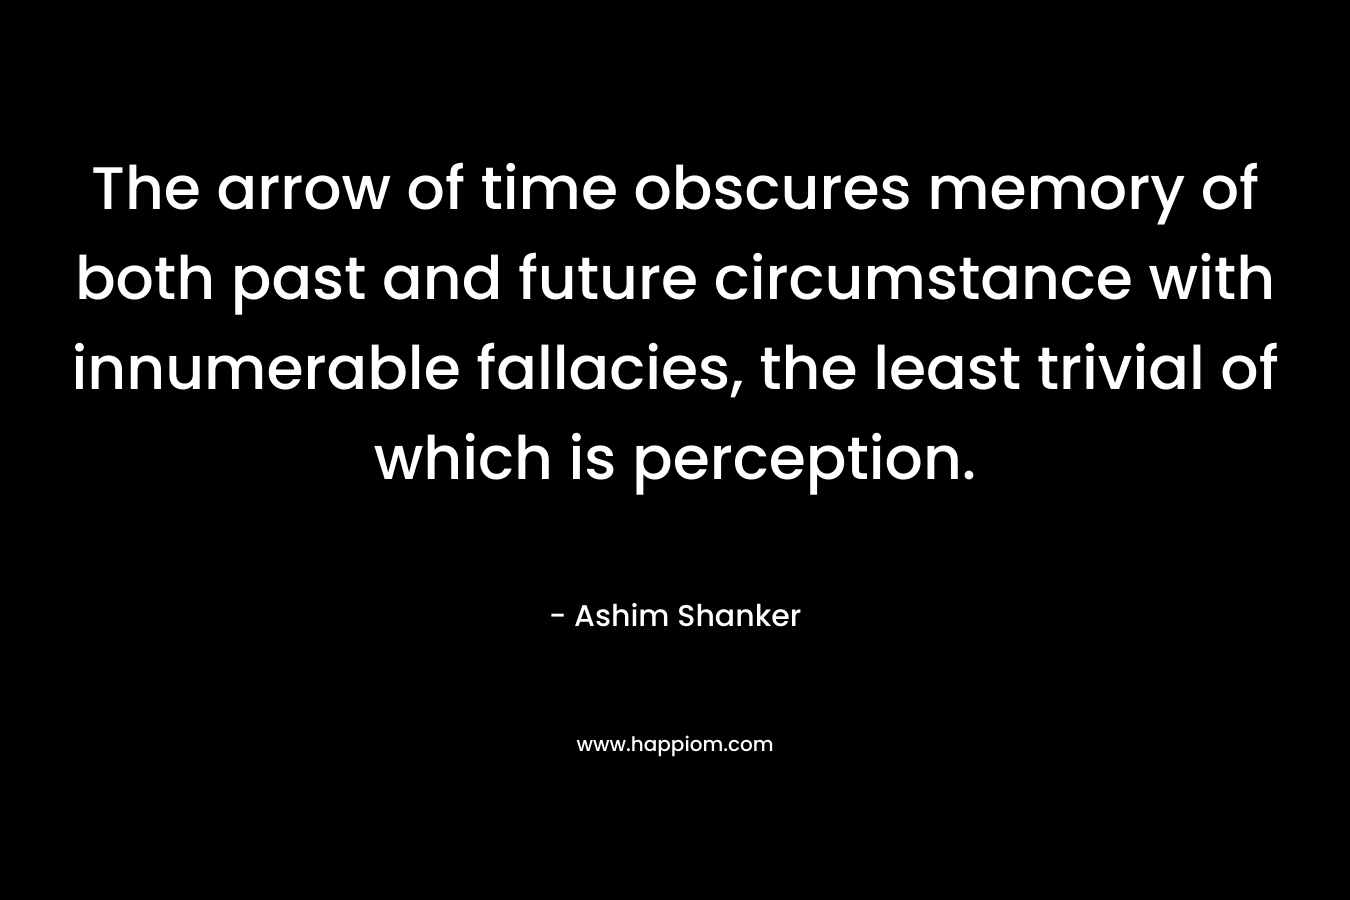 The arrow of time obscures memory of both past and future circumstance with innumerable fallacies, the least trivial of which is perception.